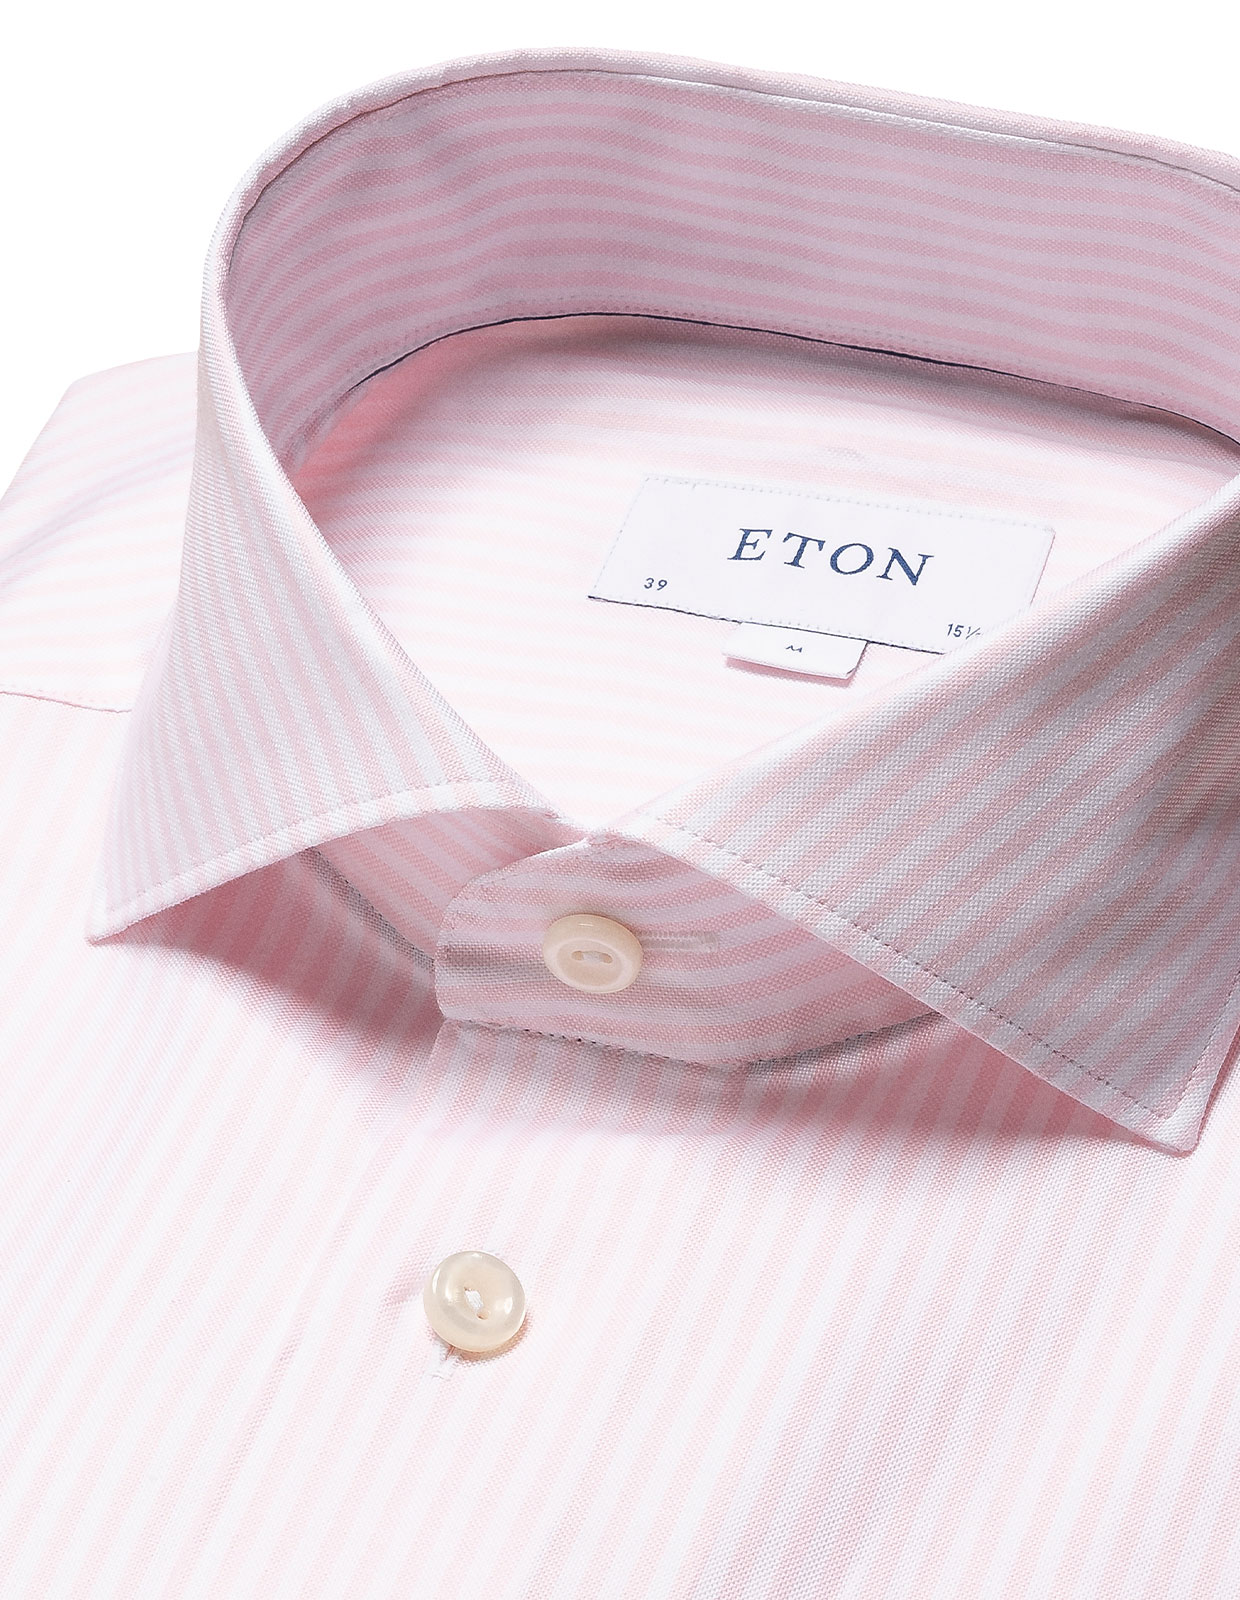 Contemporary Fit Bengal Striped Oxford Shirt Pink